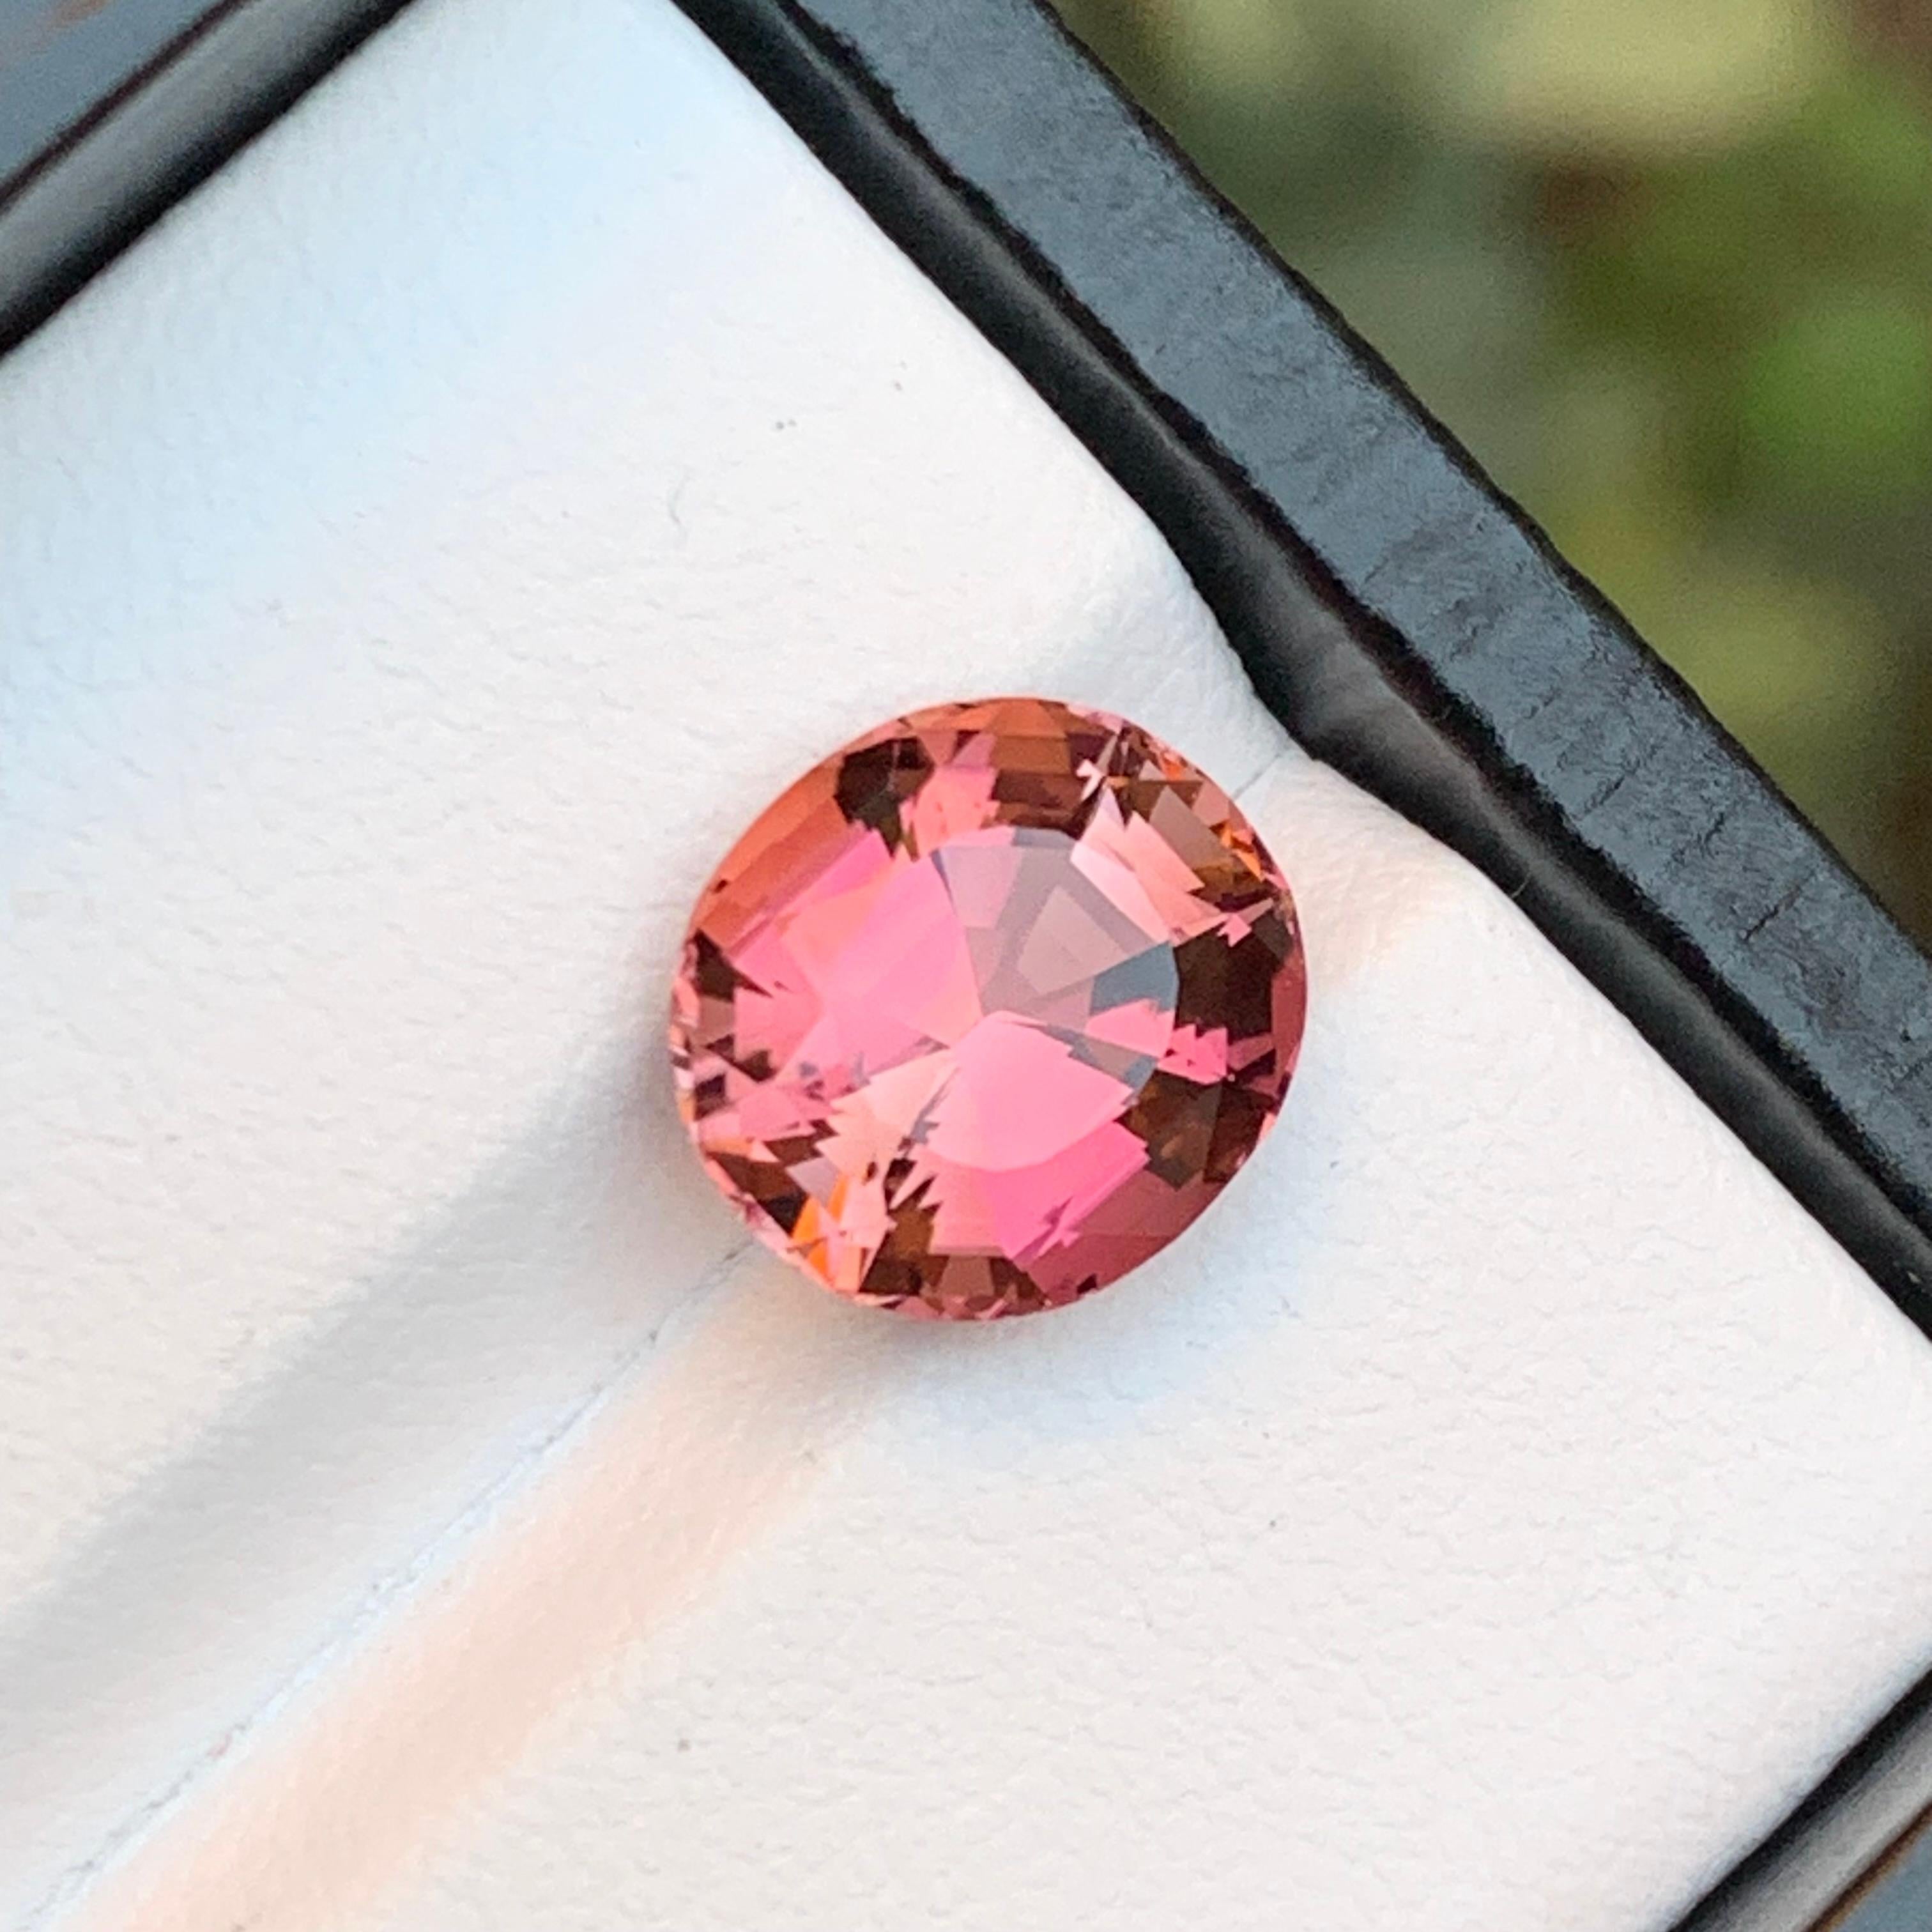 Contemporary Rare Peachy Pink Natural Tourmaline Gemstone, 3.80 Ct Fancy Cushion Cut for Ring For Sale